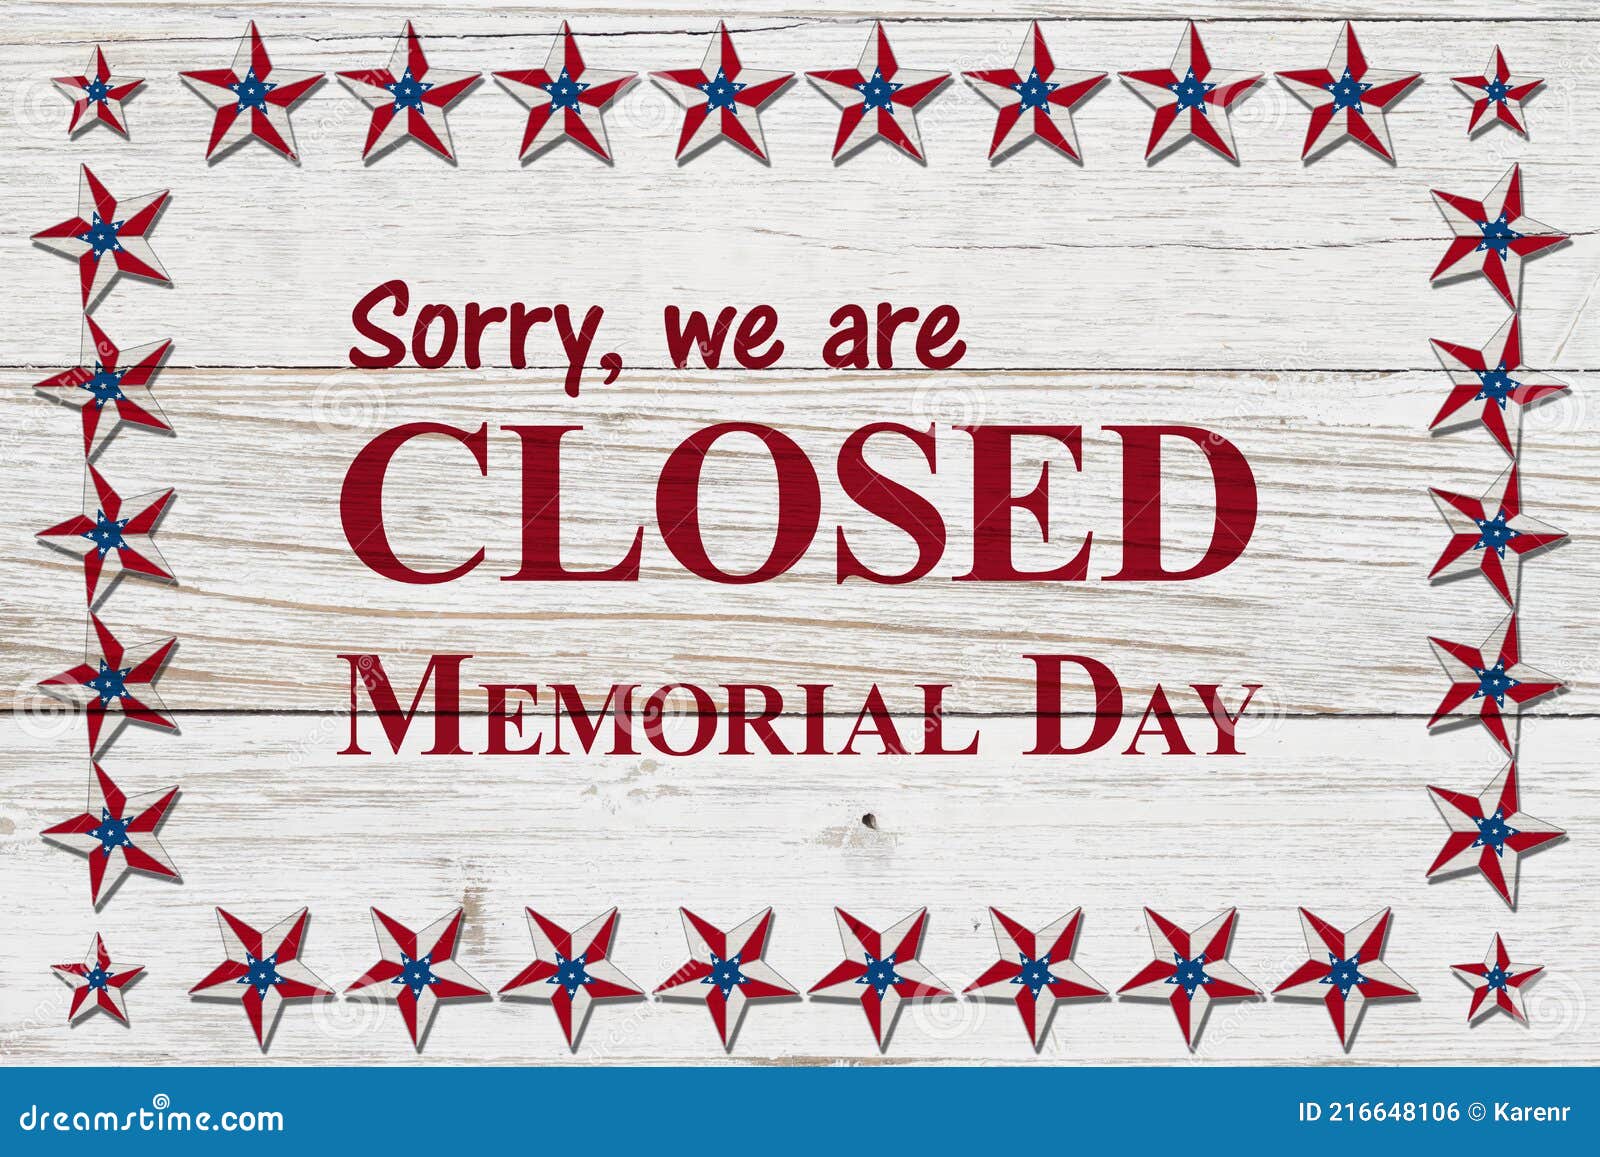 Closed Memorial Day Sign with USA Flag Stars Stock Photo Image of